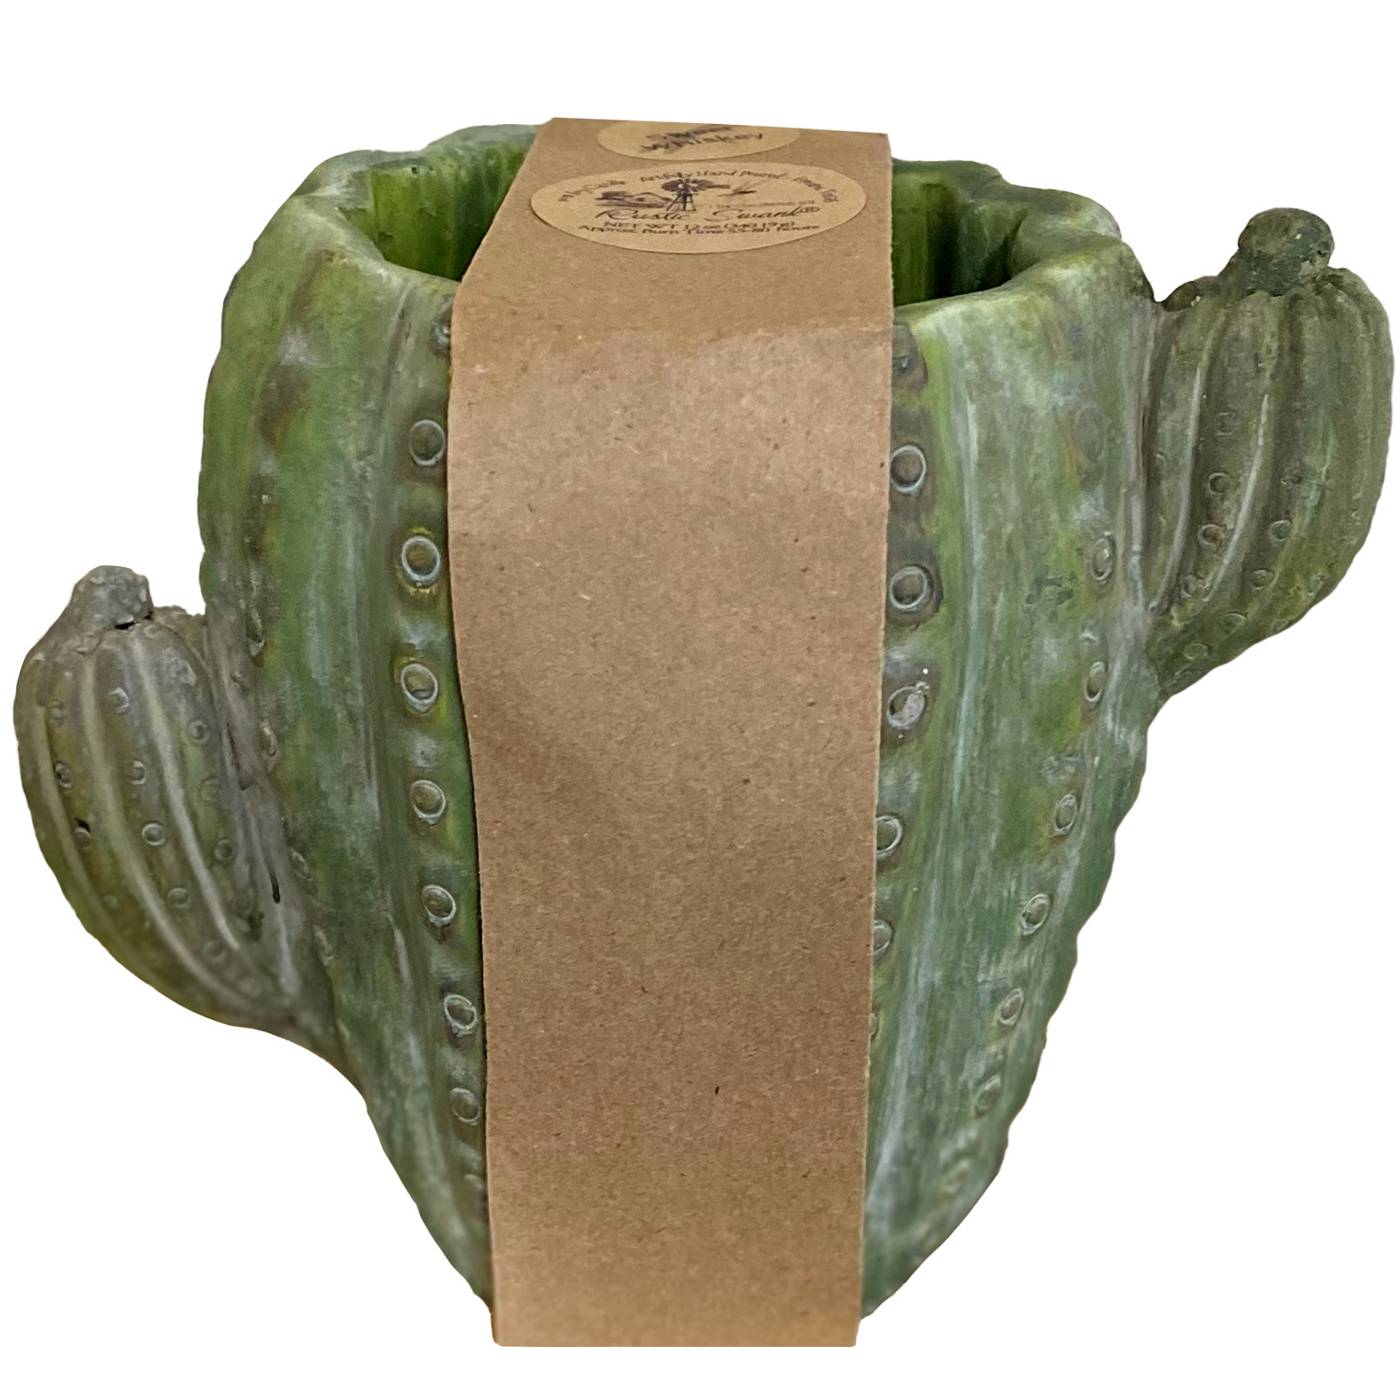 Texas Proud Rustic Swank Home Fragrant Country Boy Cactus Shape Candle; image 1 of 2